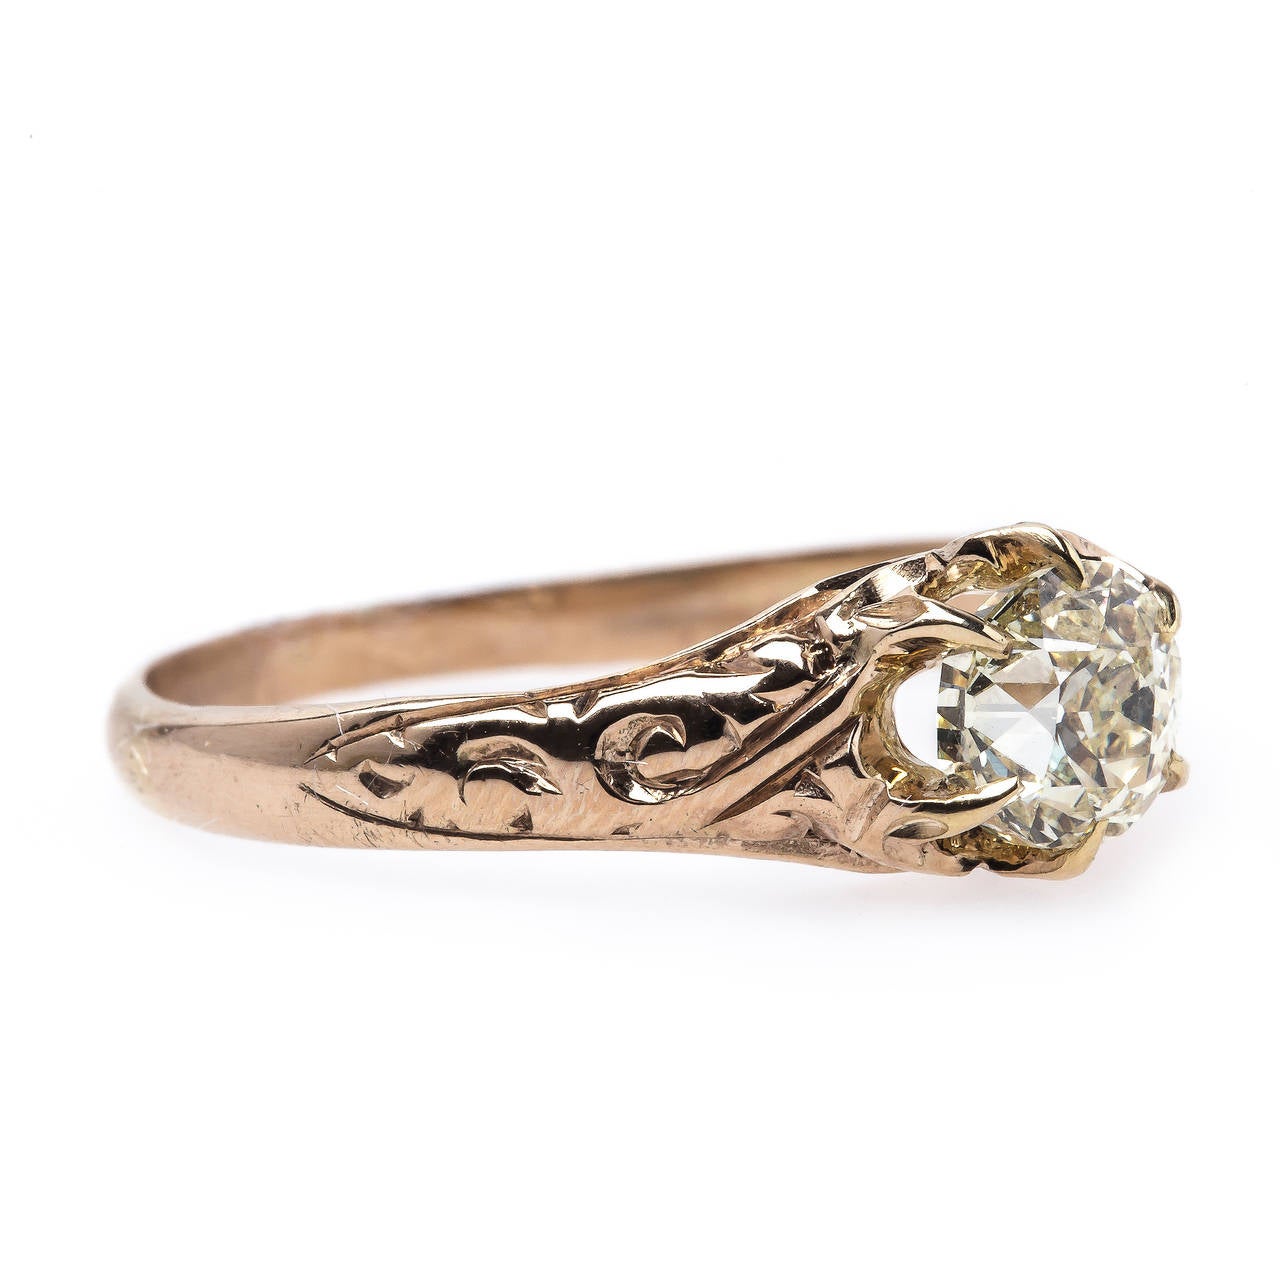 Austell is a lovely, intricate authentic Victorian era (circa 1880) engagement ring made from 14k rose gold centering a 0.67ct EGL Certified Old European Cut diamond graded O-P color and SI1 clarity. The rose gold setting is very unique to our